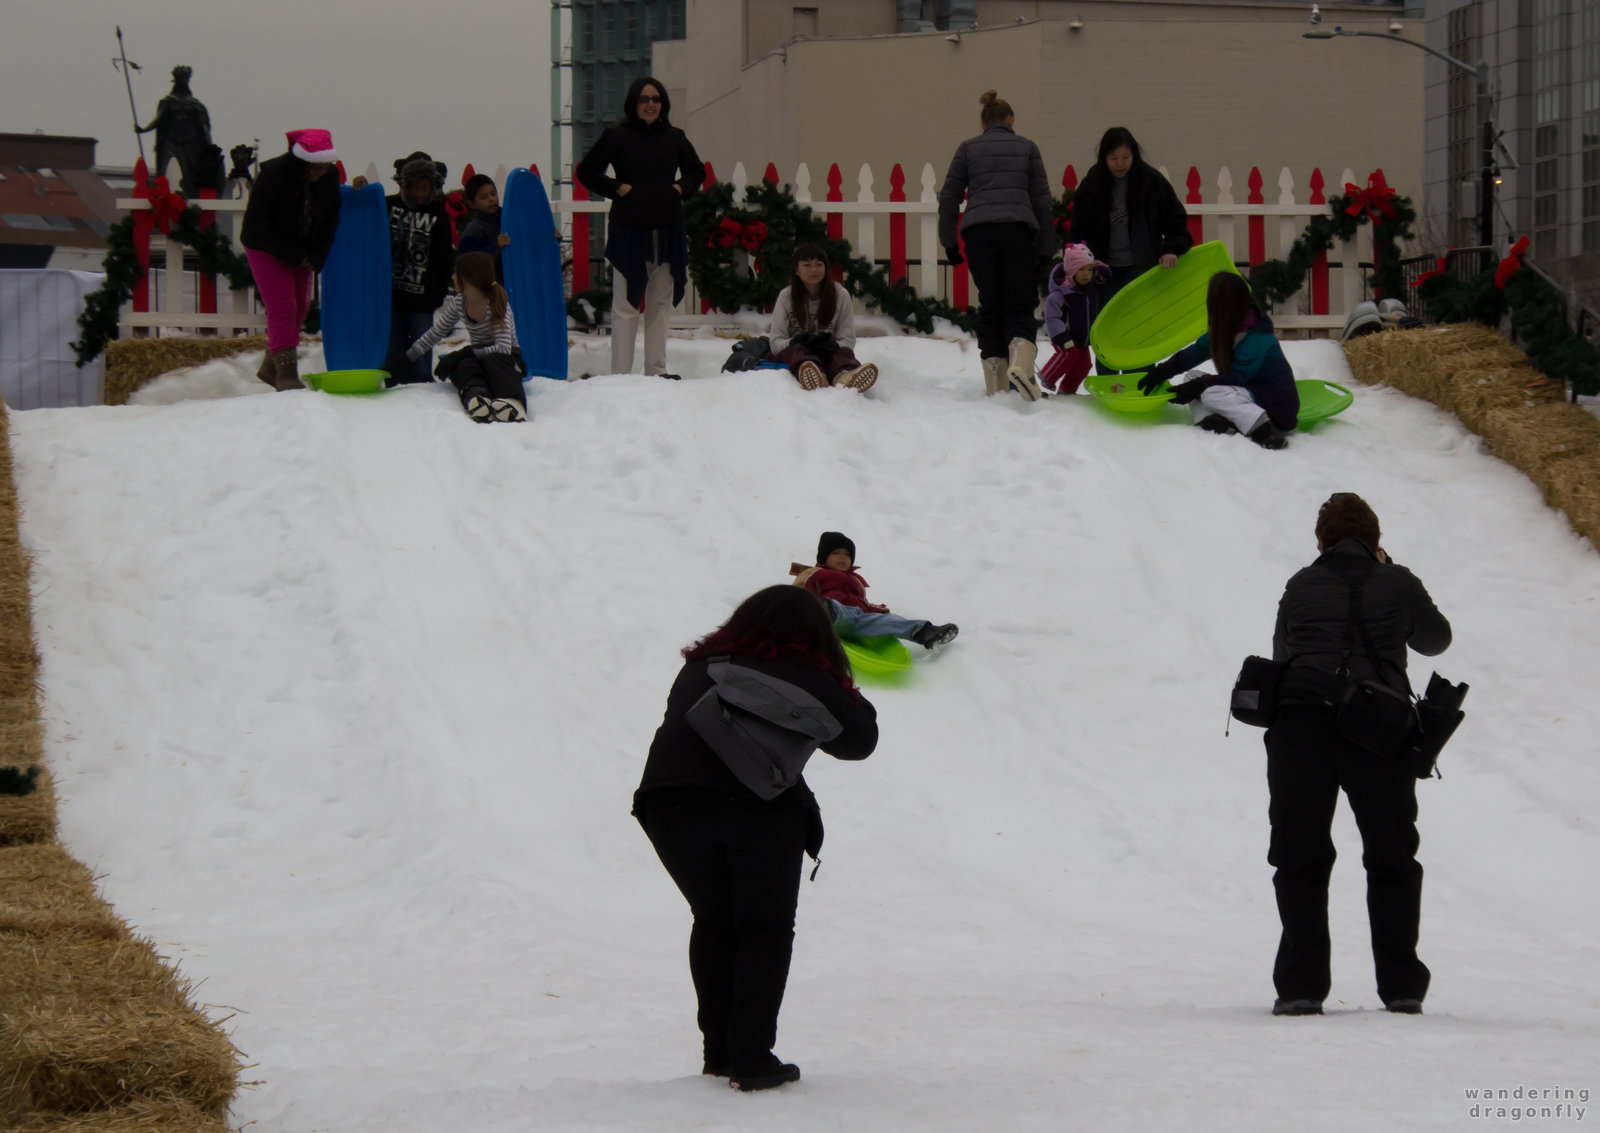 Supposedly the biggest snowy slope near by San Francisco -- children, playing, slope, snow